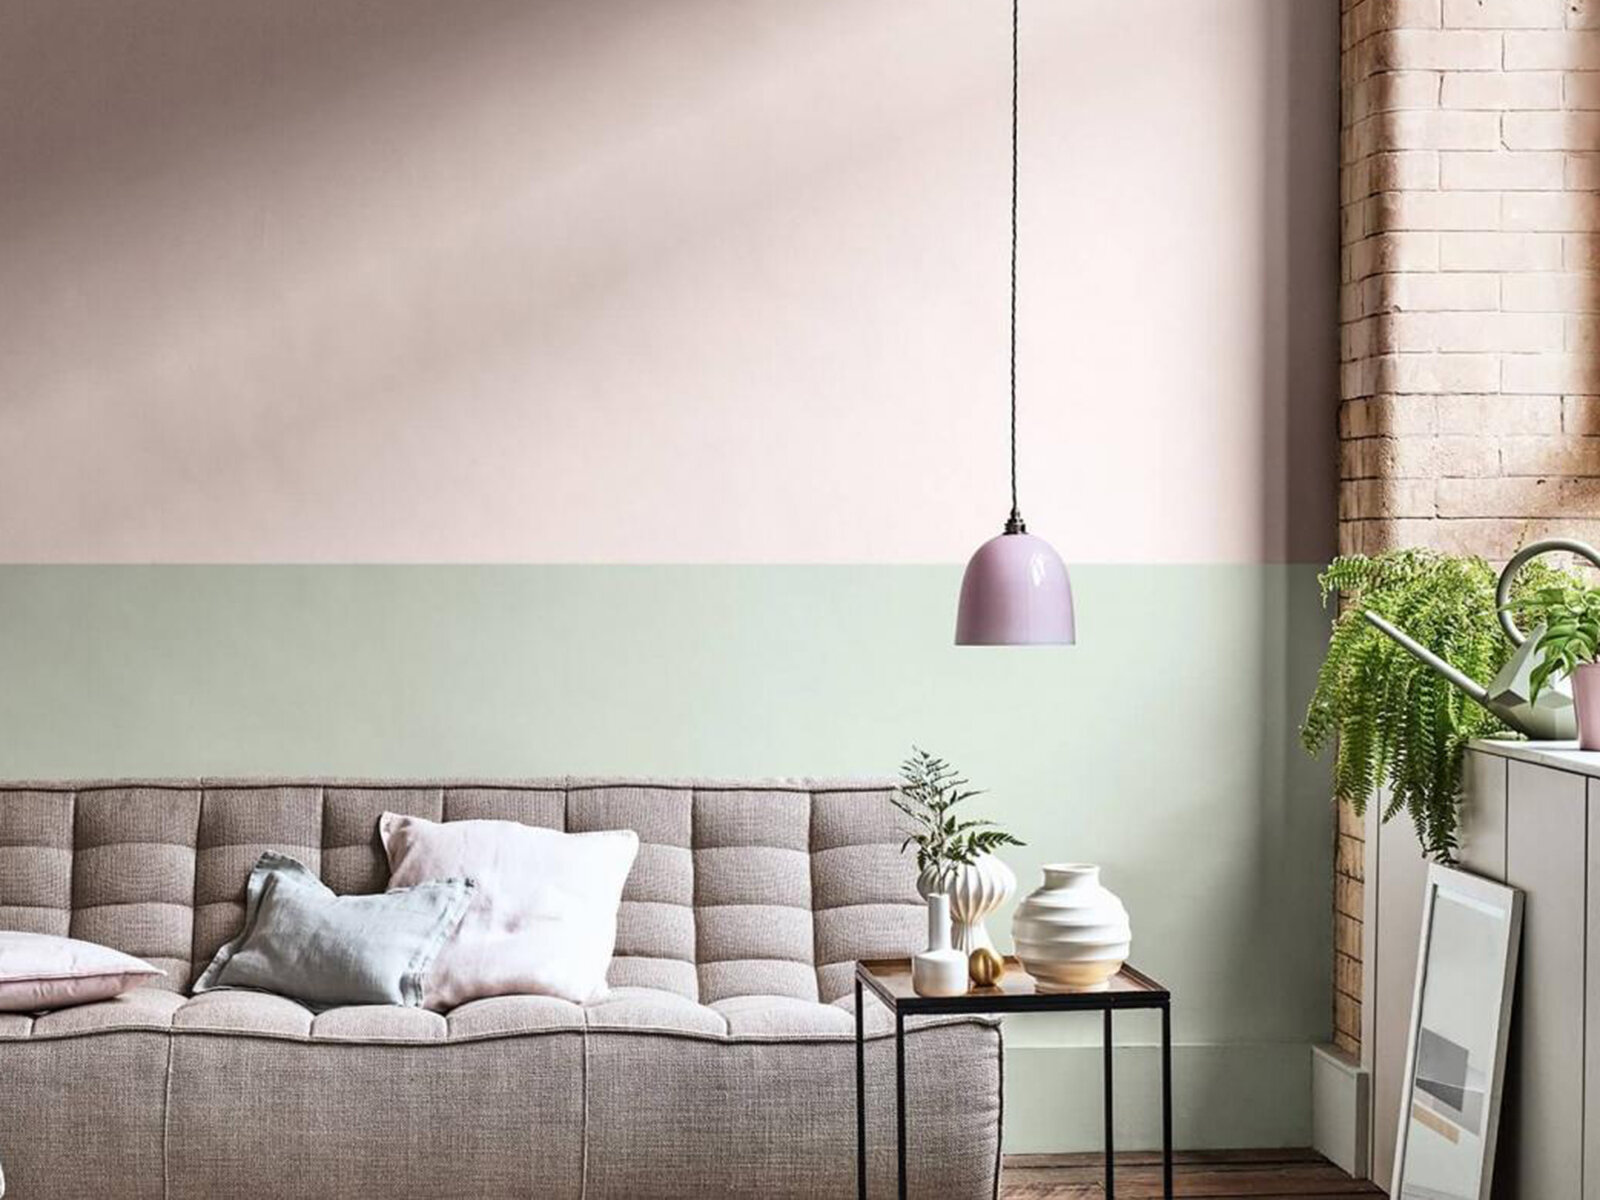 dulux-colour-futures-colour-of-the-year-2020-a-home-for-care-livingroom-inspiration-united-kingdom-21_0.jpg